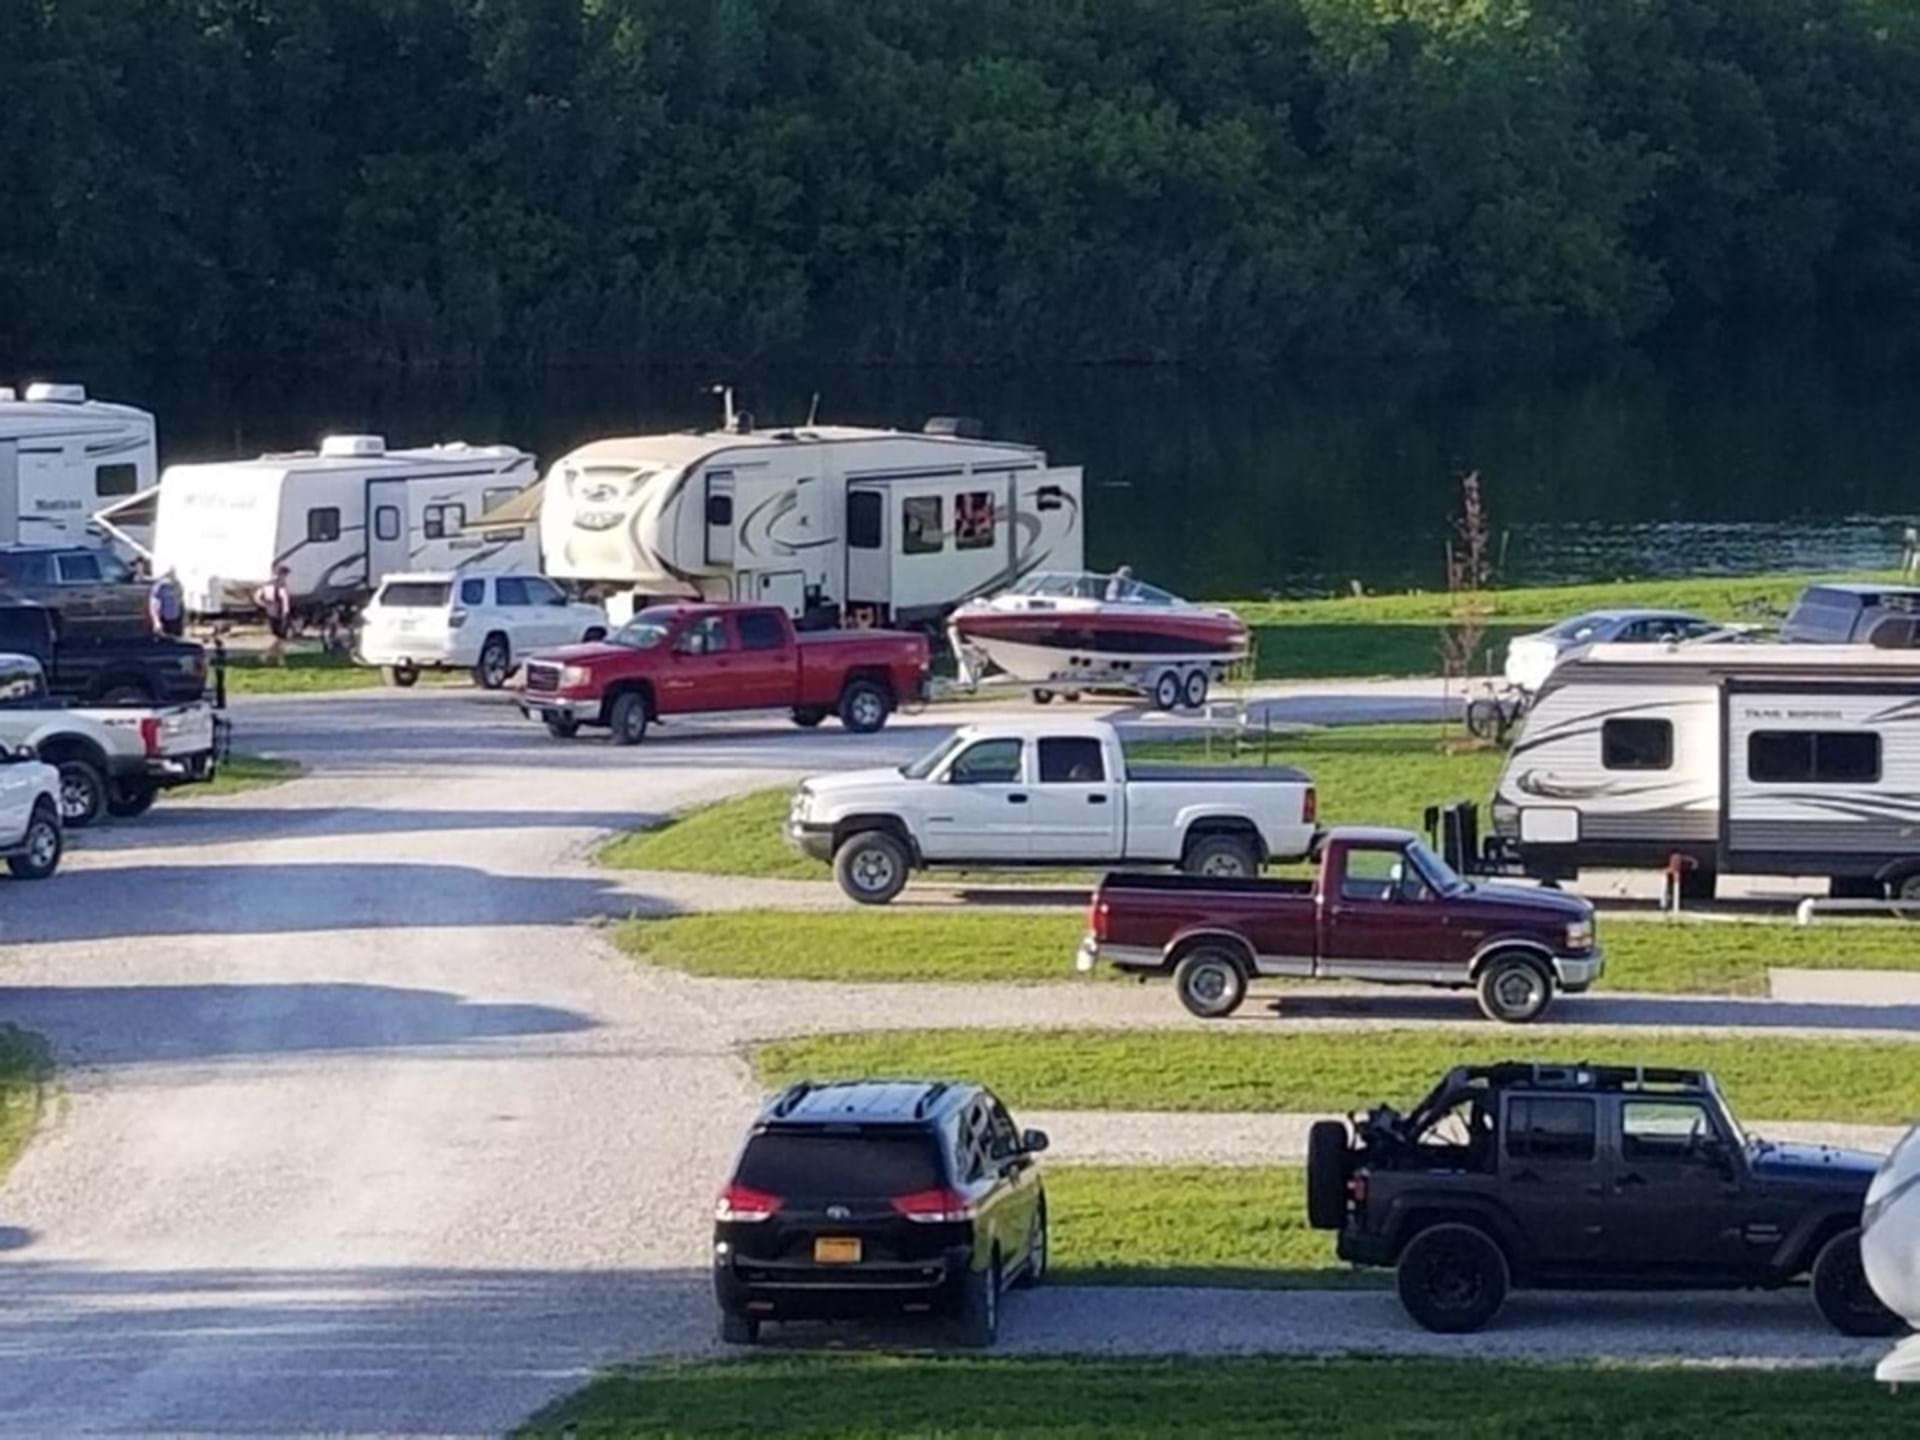 Nice Clean Campground with plenty of space!